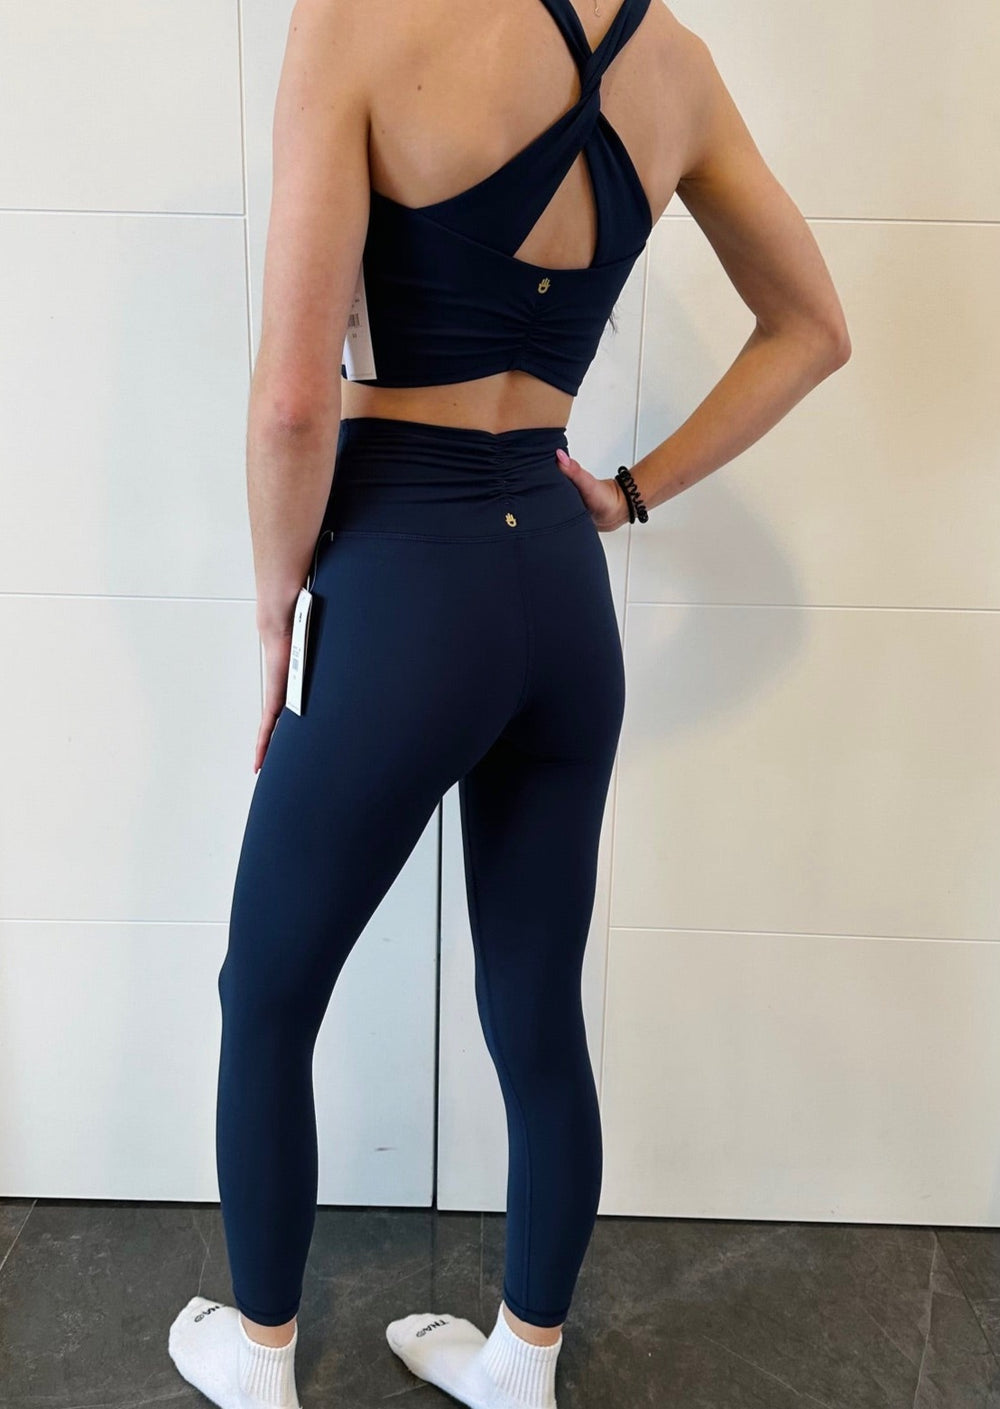 EVERLY CINCHED WAIST 7/8 LEGGING